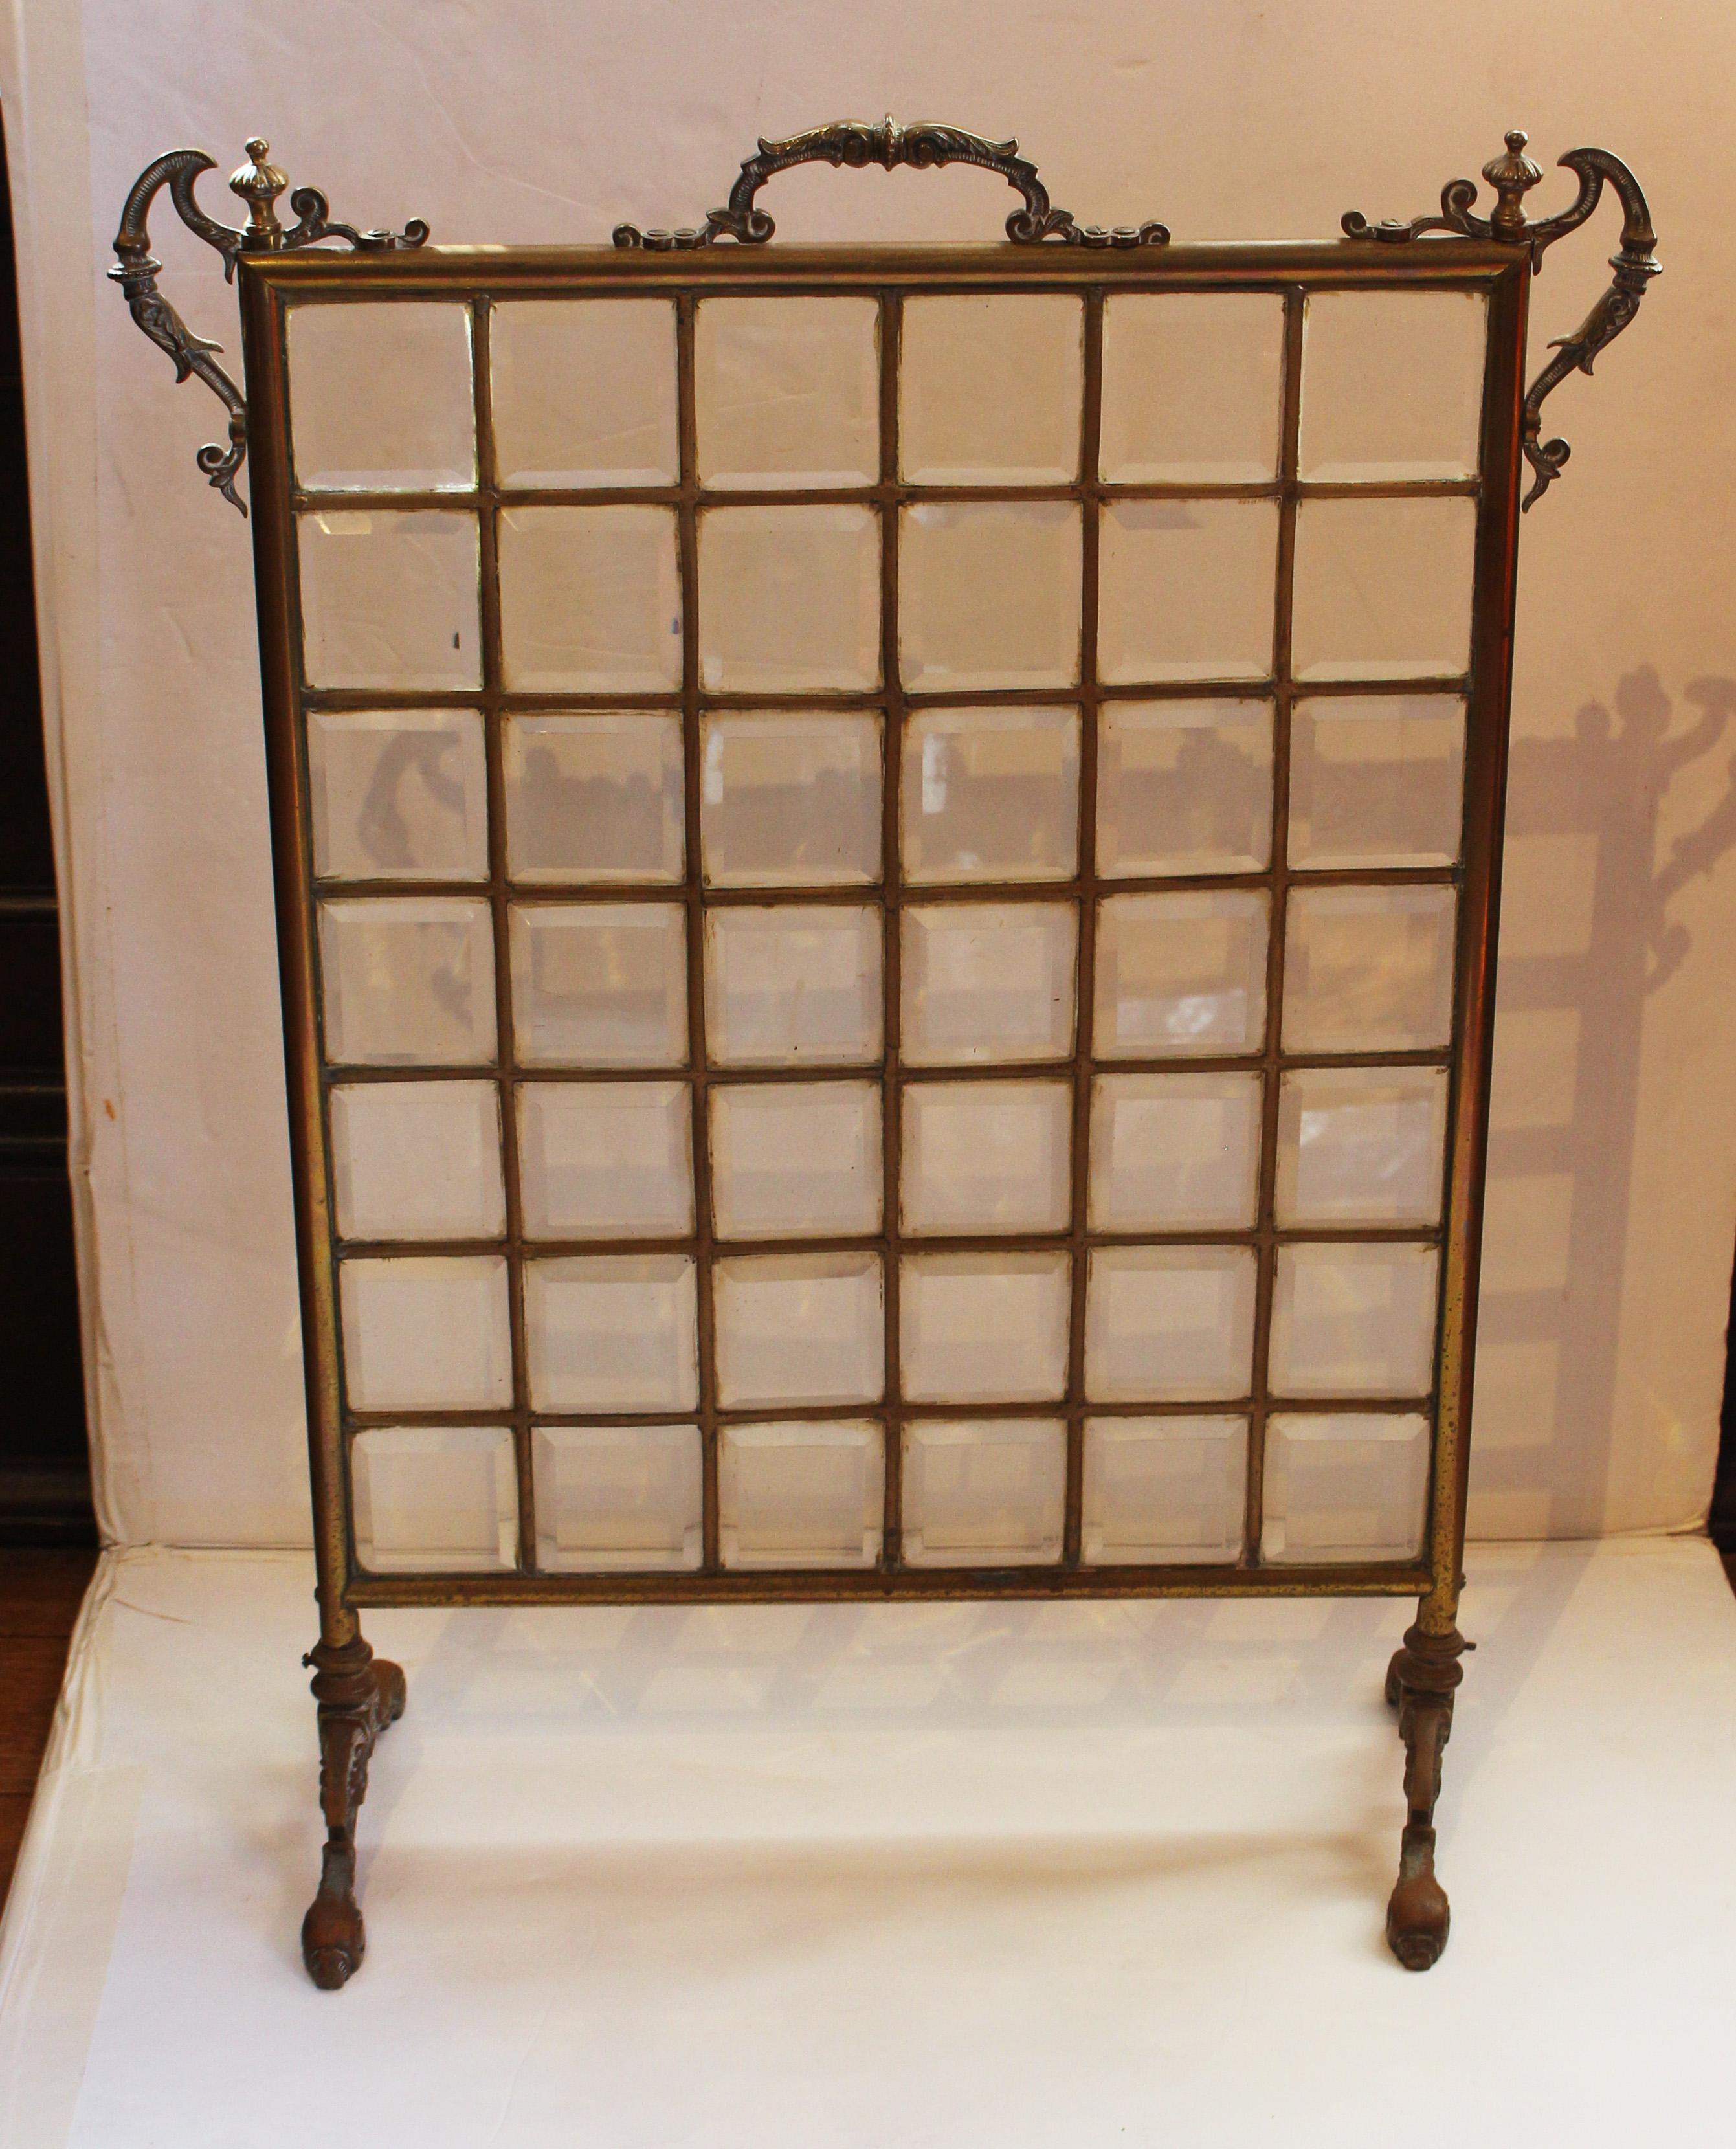 Circa 1900 beveled glass & brass fireplace screen, American or English. Forty-two beveled glass panels set in brass channels contained in ornate, cast & tubular brass frame.
23.5